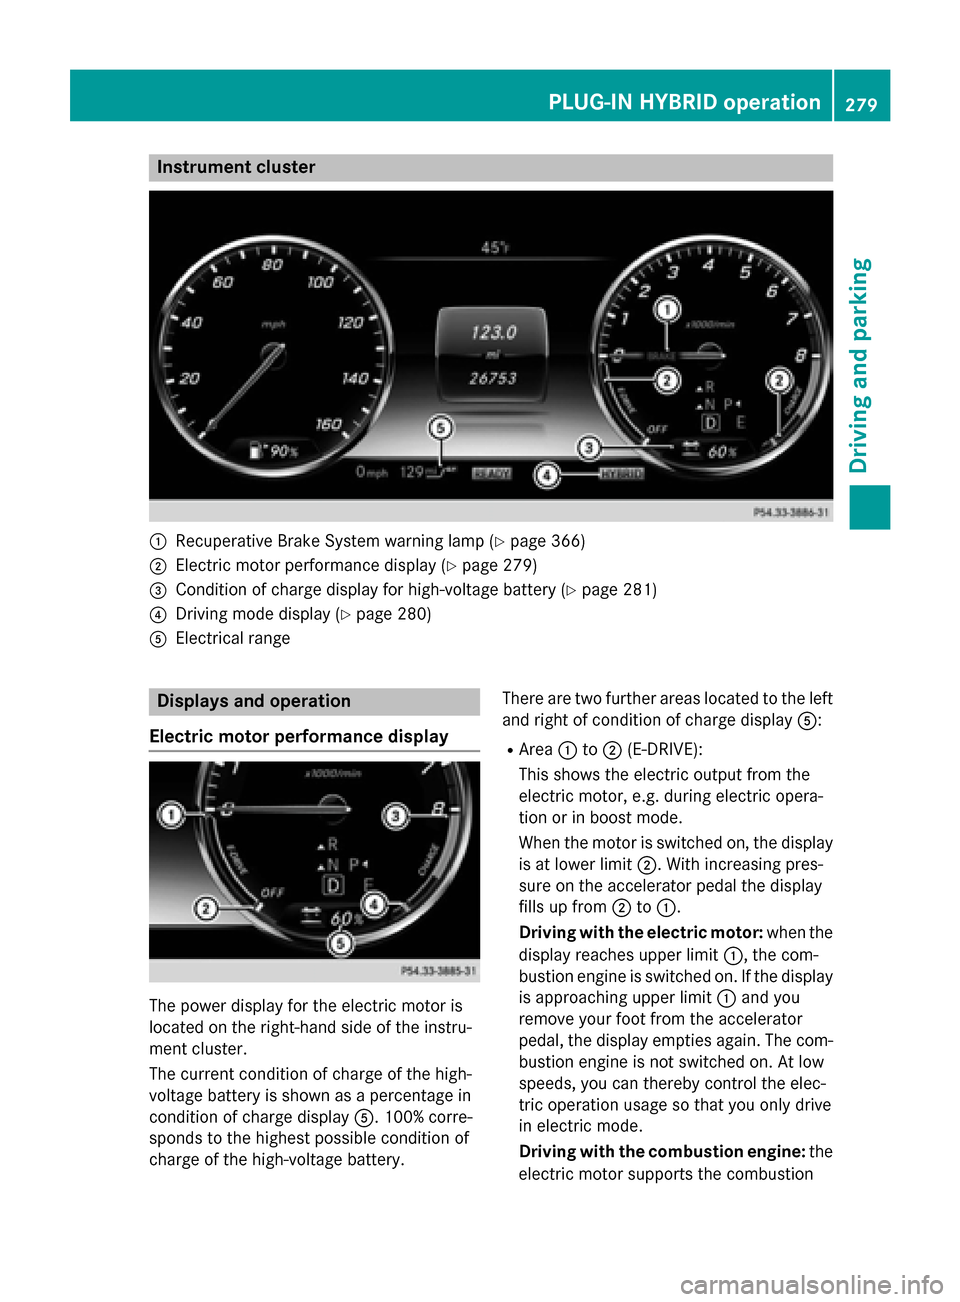 MERCEDES-BENZ S-Class 2015 W222 Workshop Manual Instrument cluster
:
Recuperative Brake System warning lamp (Y page 366)
; Electric motor performance display (Y page 279)
= Condition of charge display for high-voltage battery (Y page 281)
? Driving